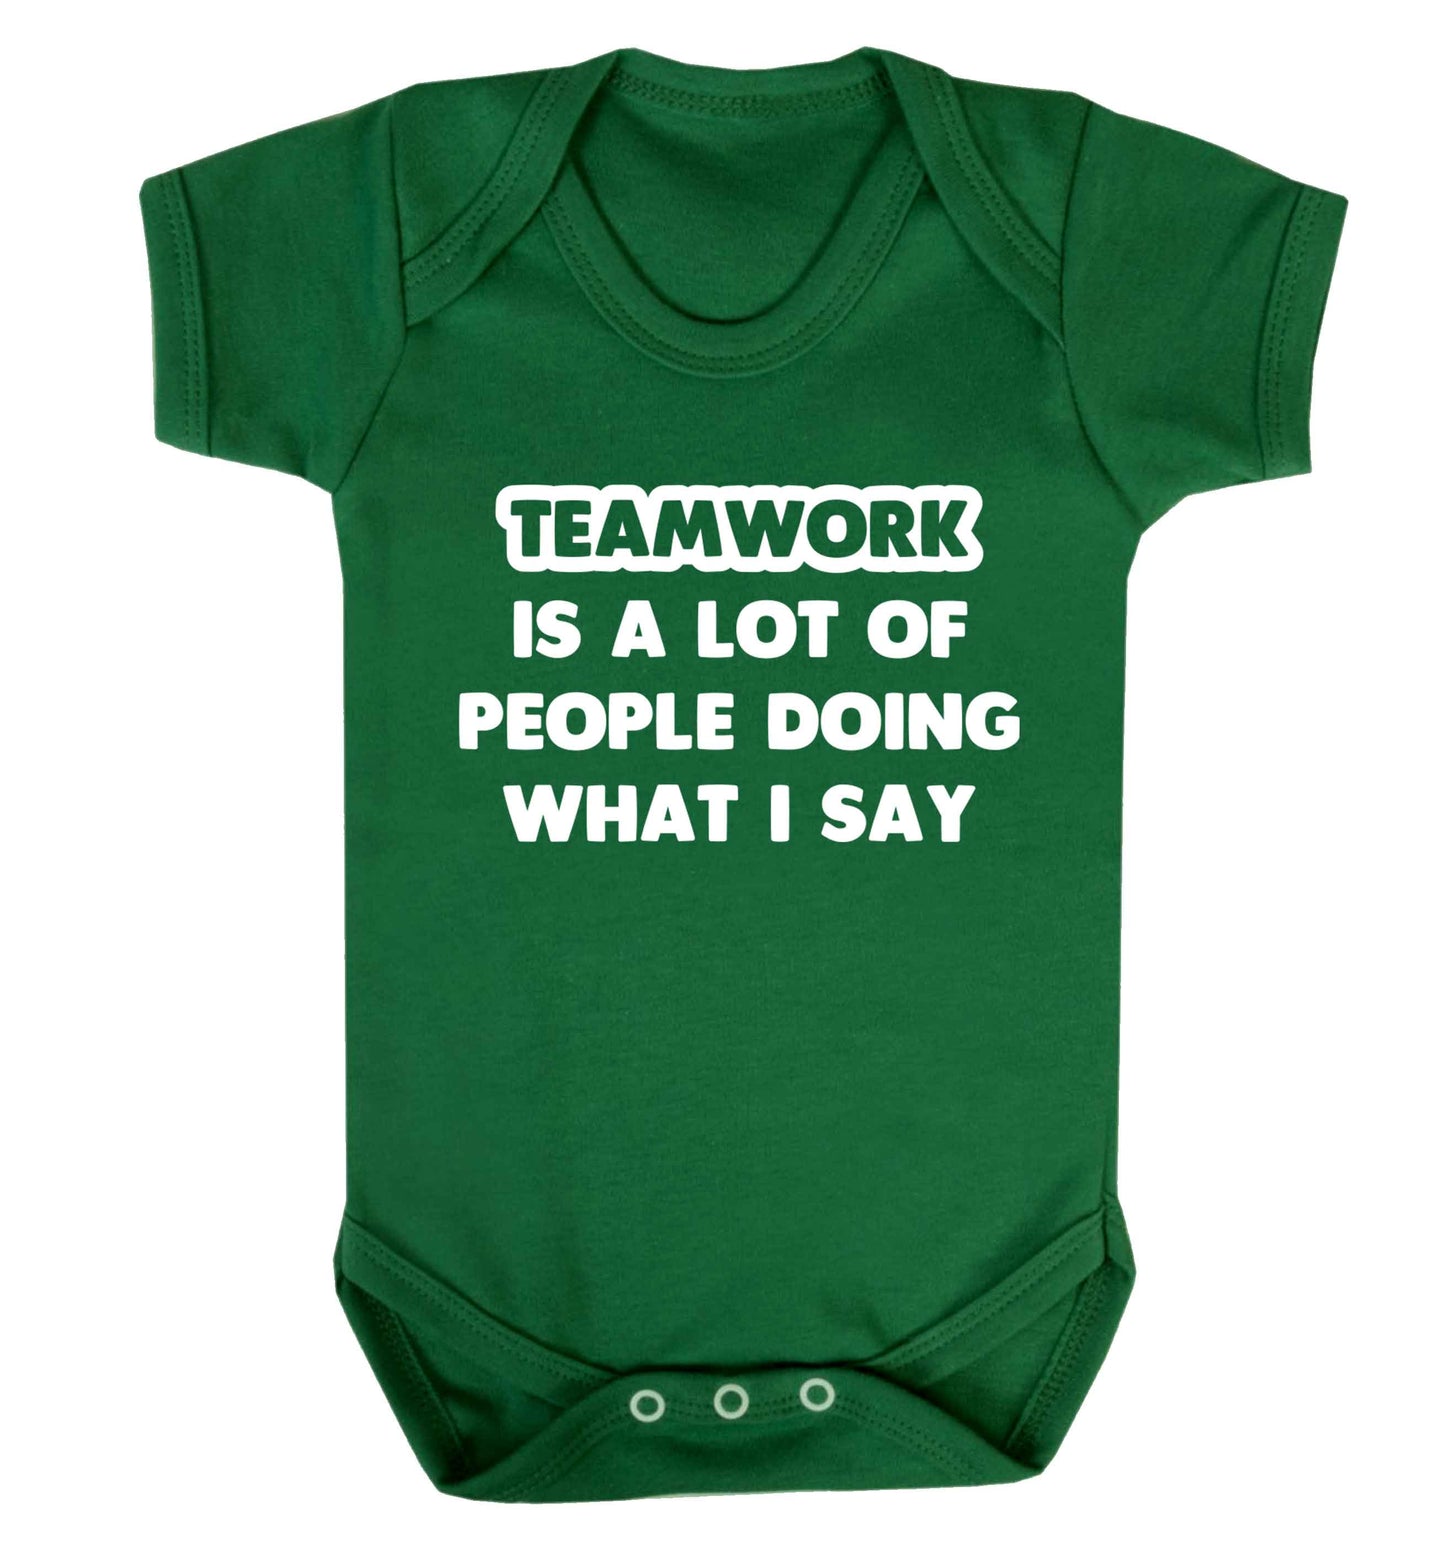 Teamwork is a lot of people doing what I say Baby Vest green 18-24 months